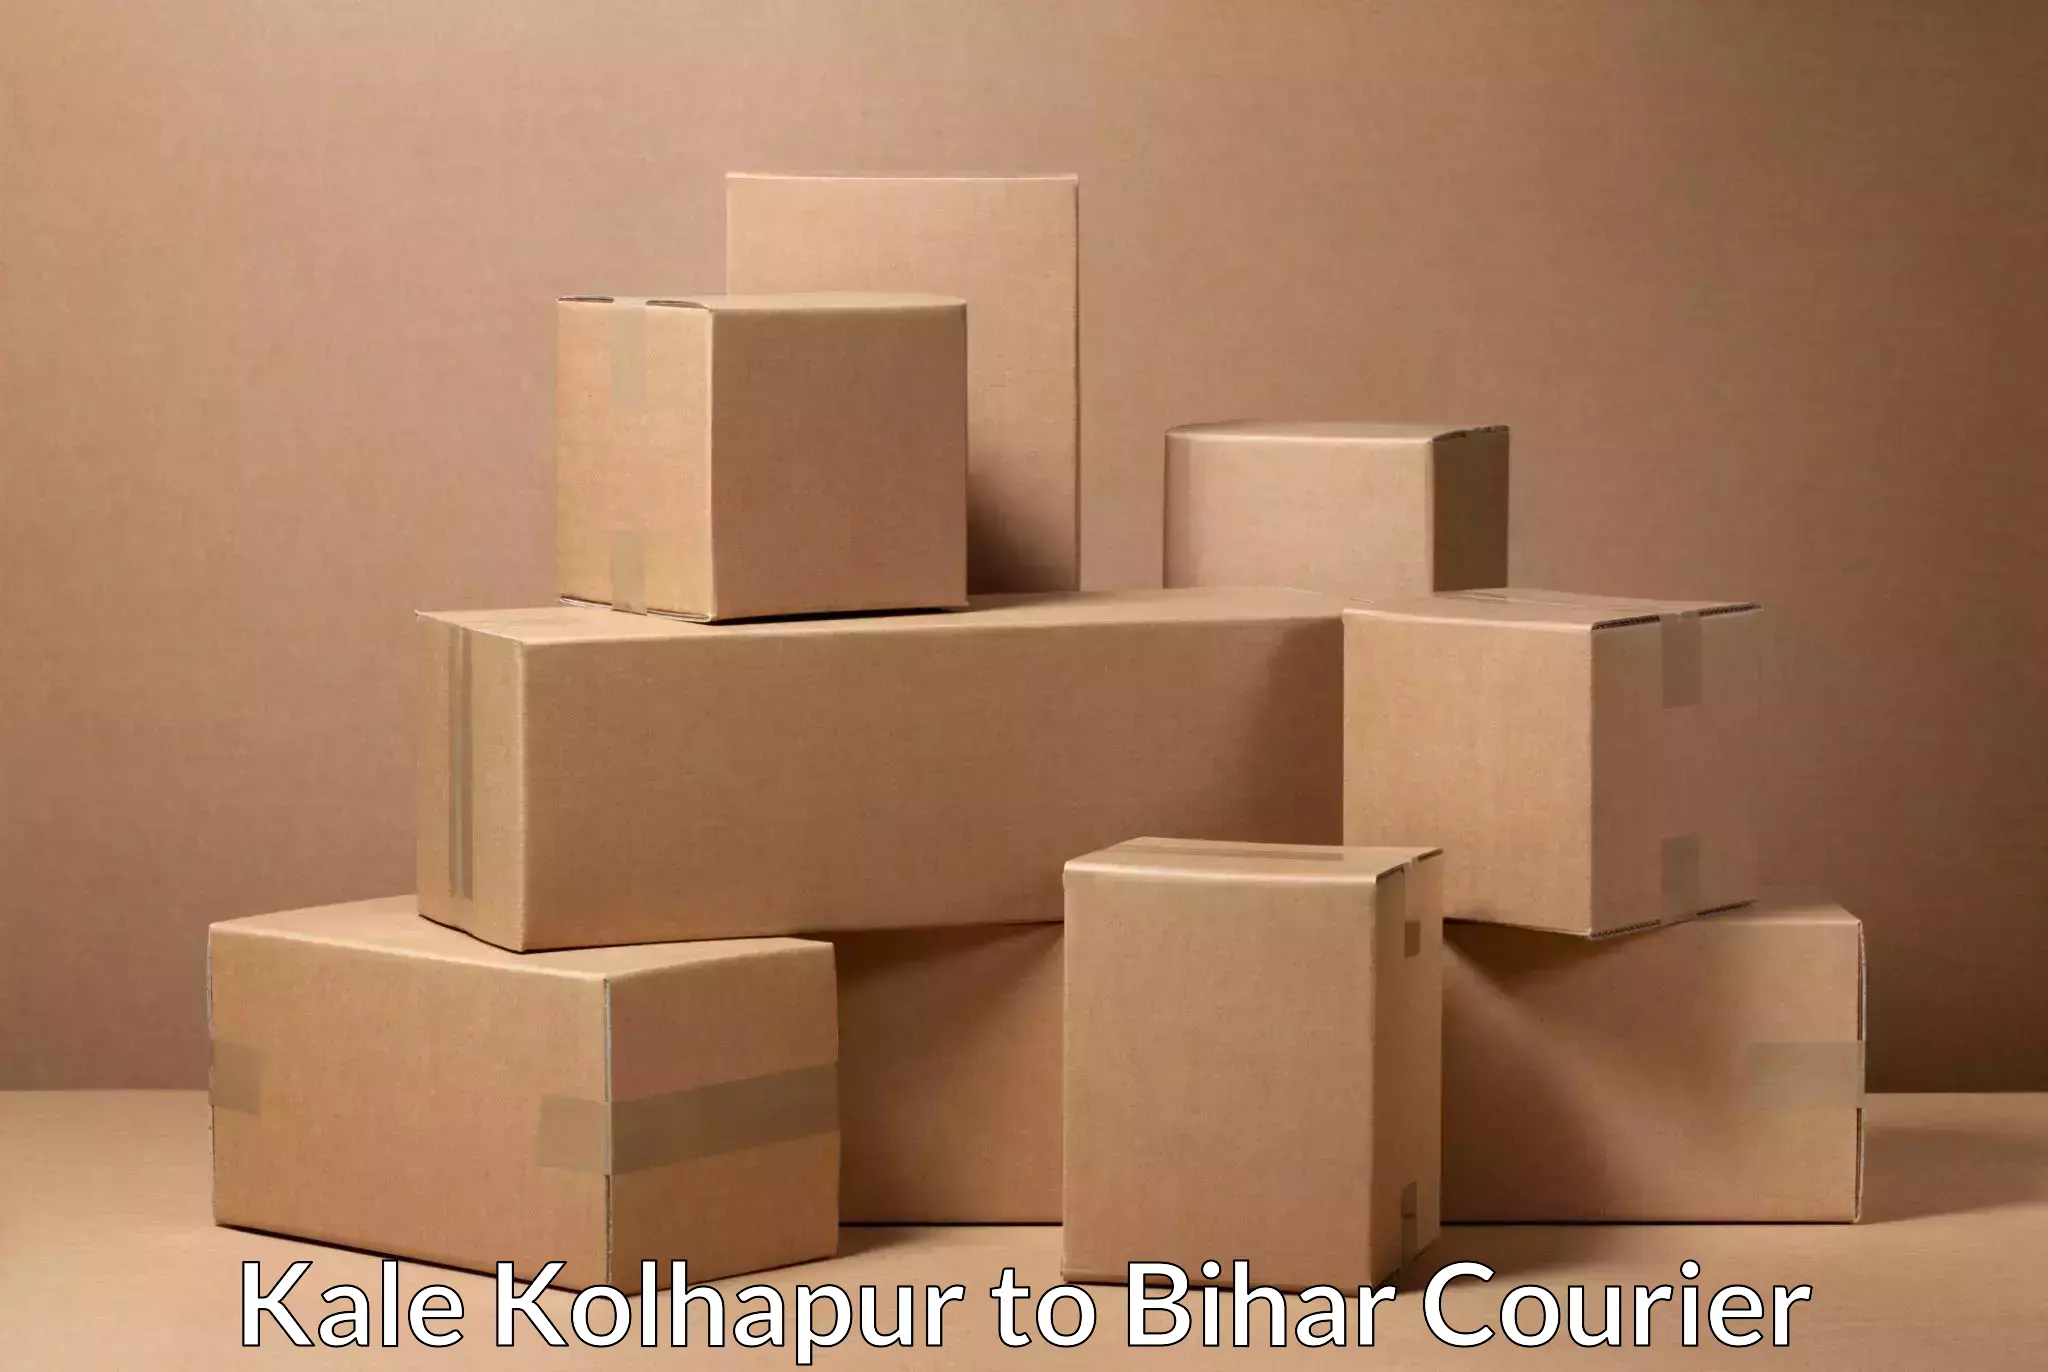 Easy access courier services Kale Kolhapur to Patna